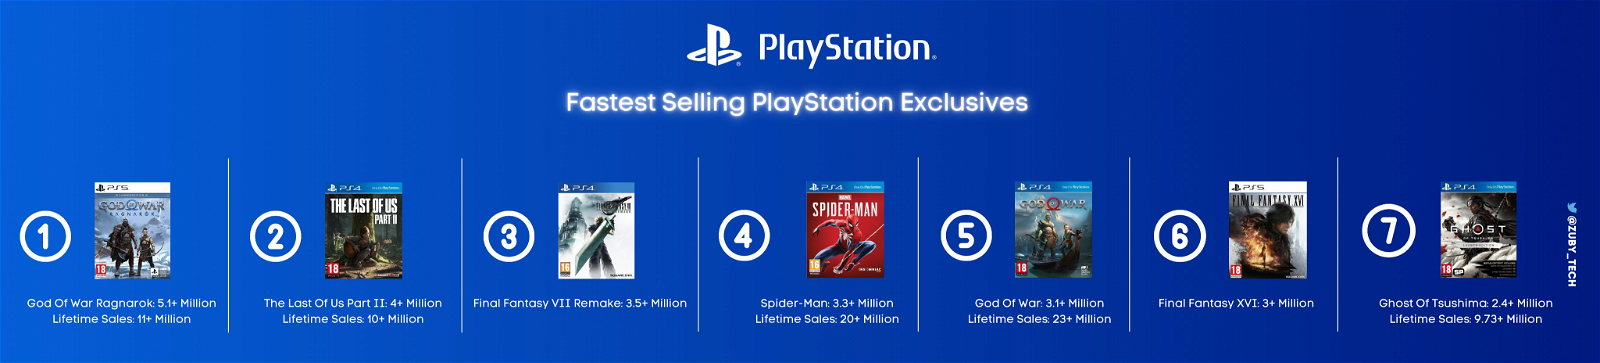 Lifetime Sales Numbers of PlayStation Exclusives